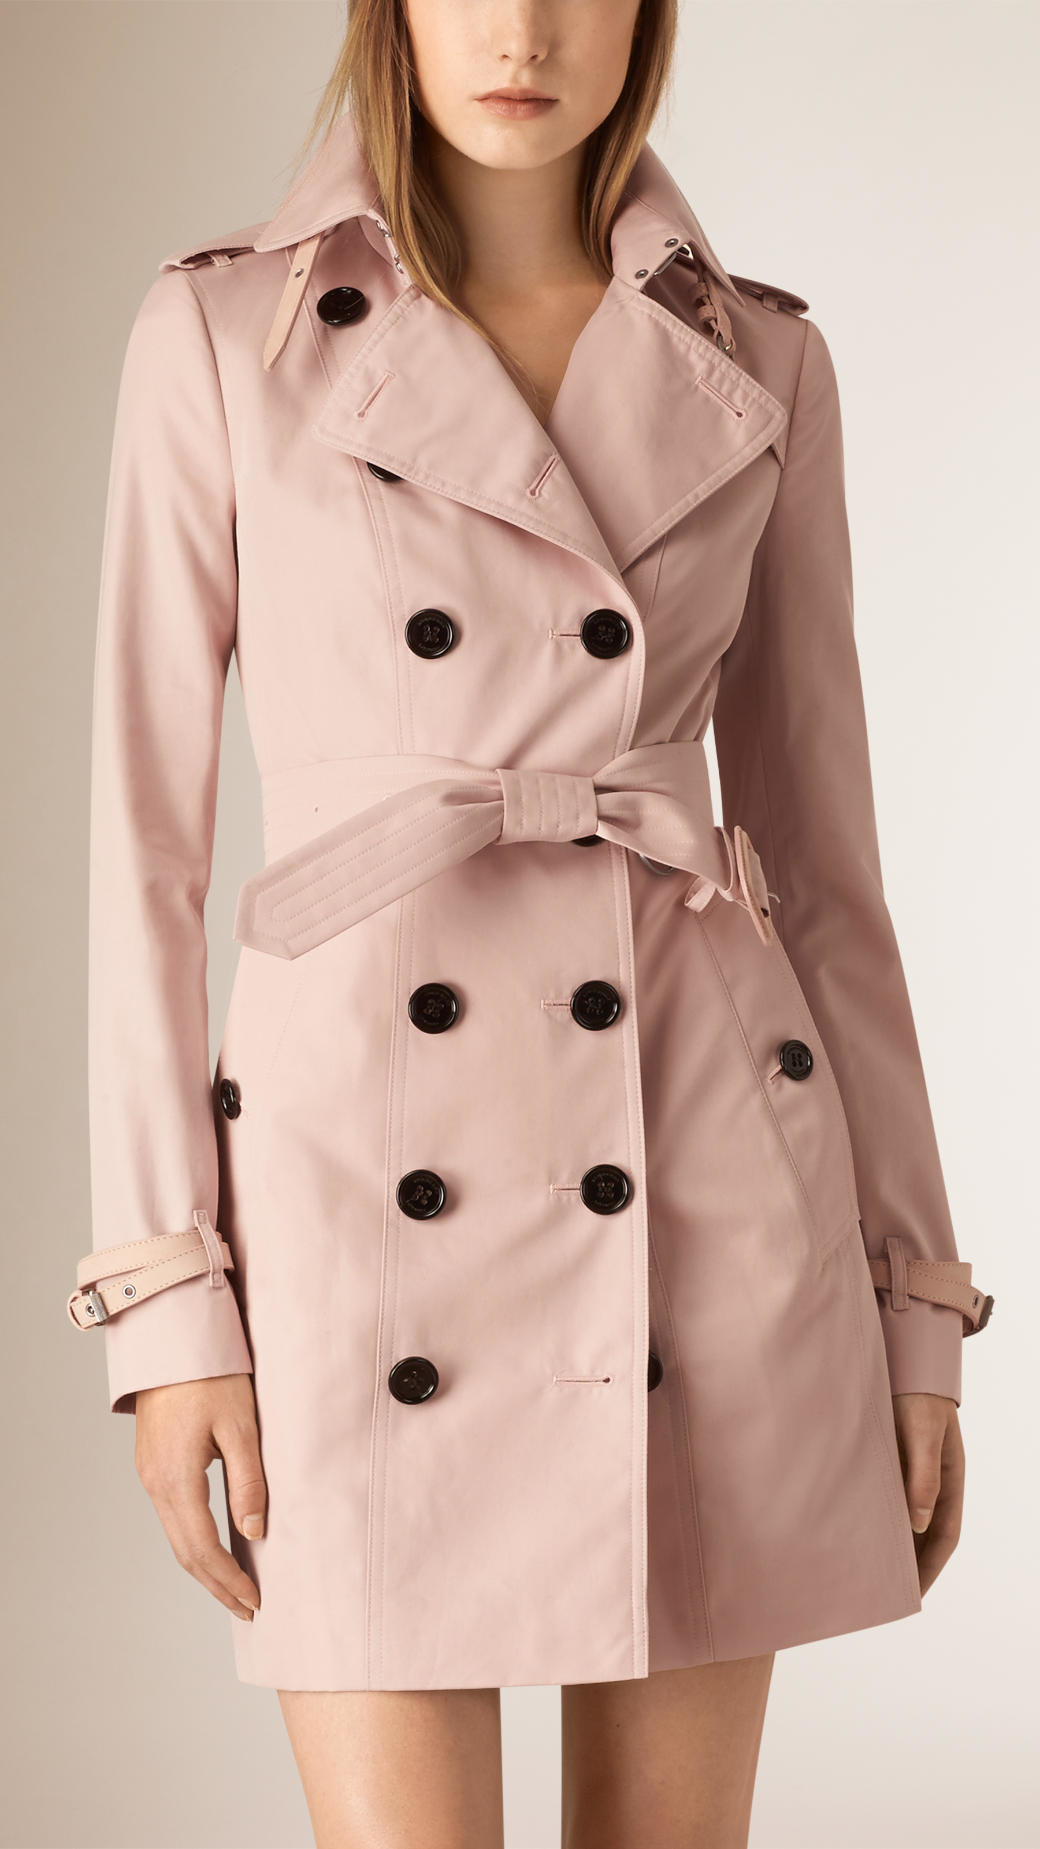 Burberry Leather Trim Cotton Gabardine Trench Coat in Ice Pink (Pink) | Lyst